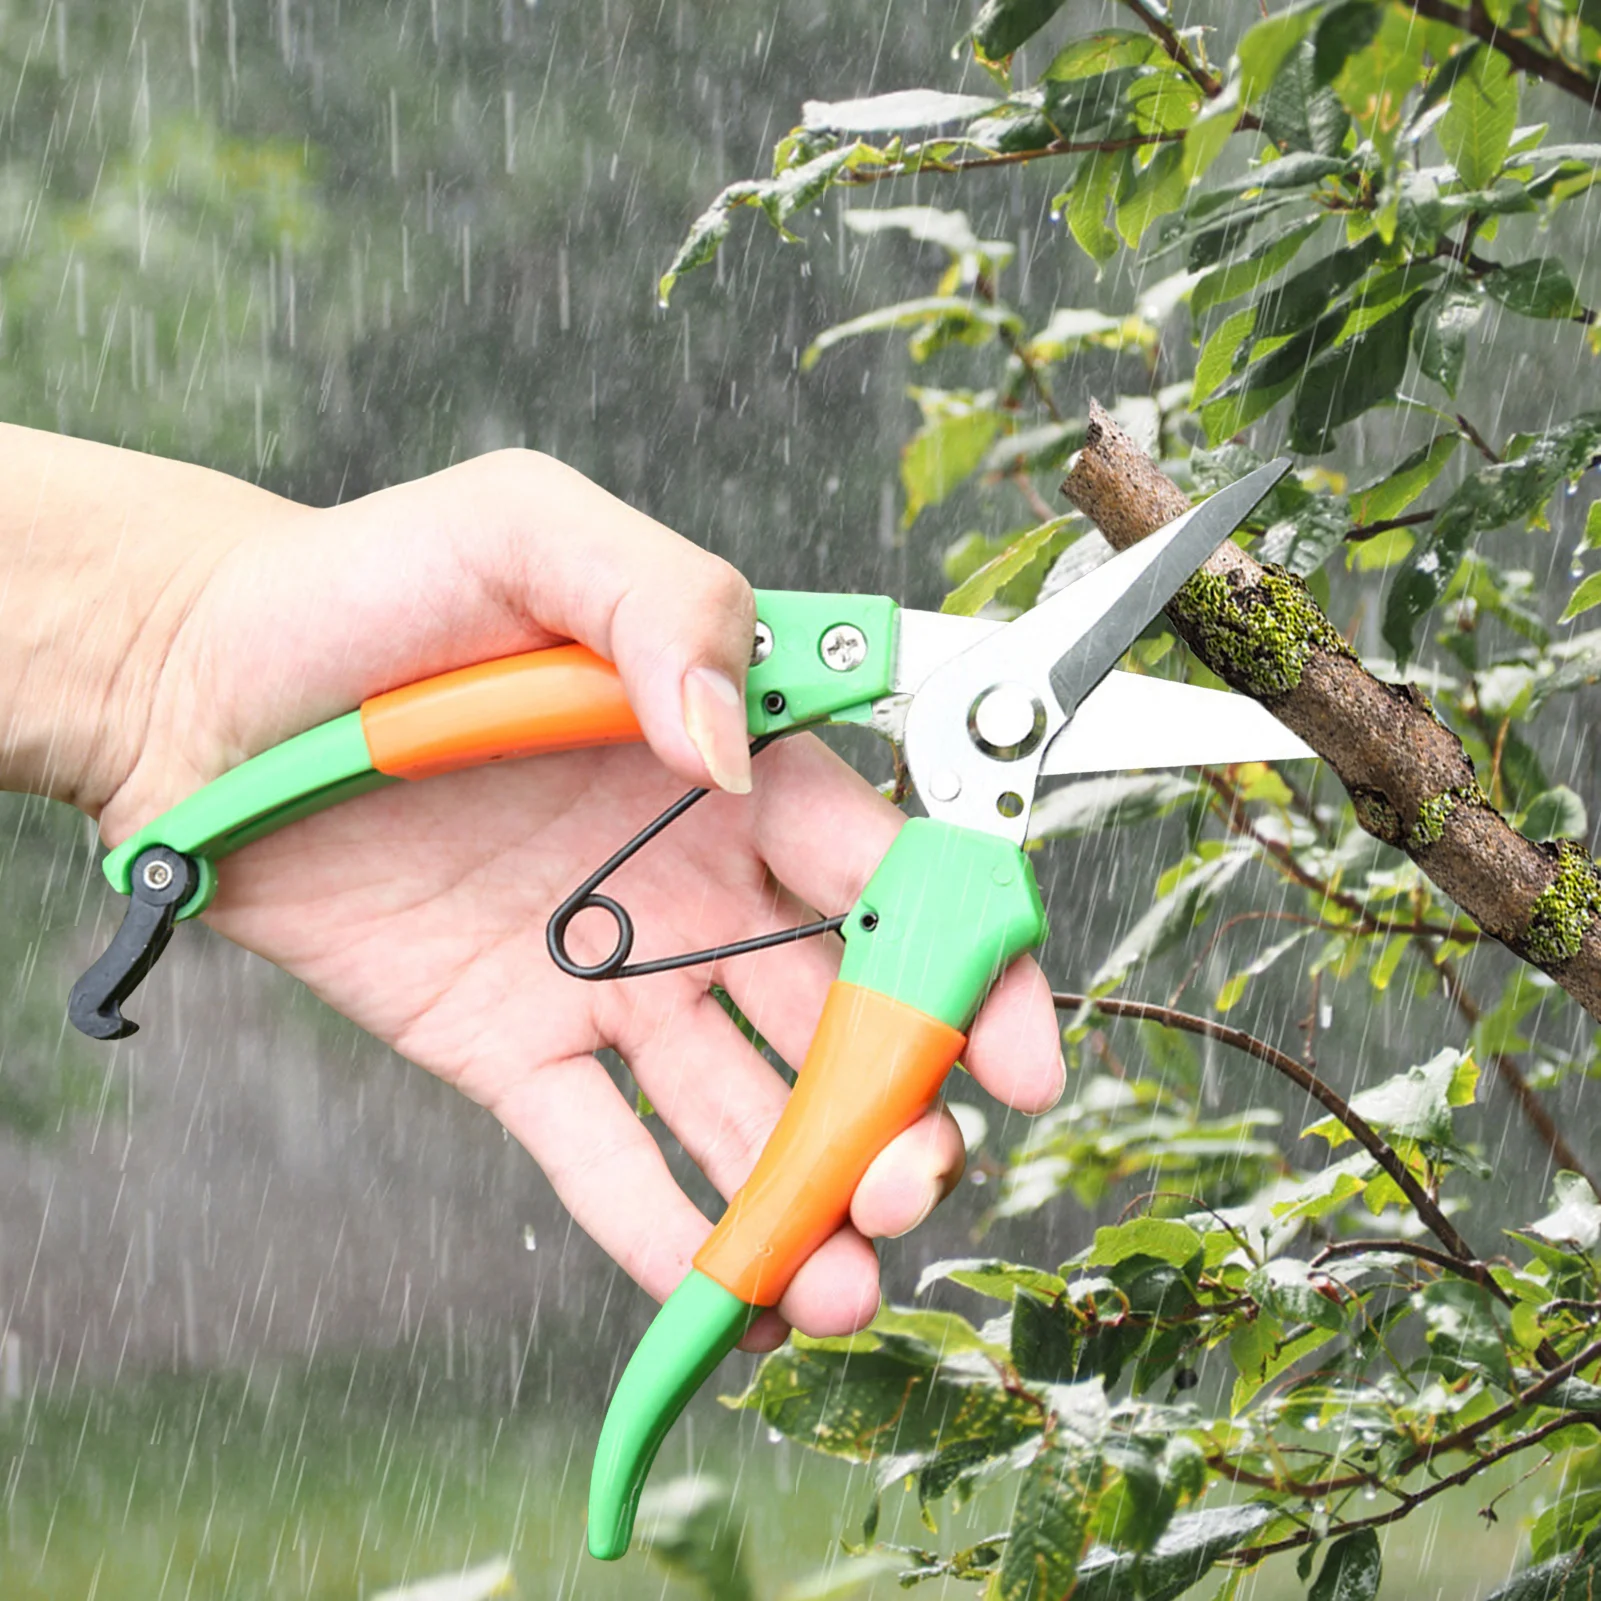 

Pruning Shears Sharp Stainless Steel Garden Shears Tree Branch Cutting Trimmers Secateurs Hand Gardening Pruner Clippers For The